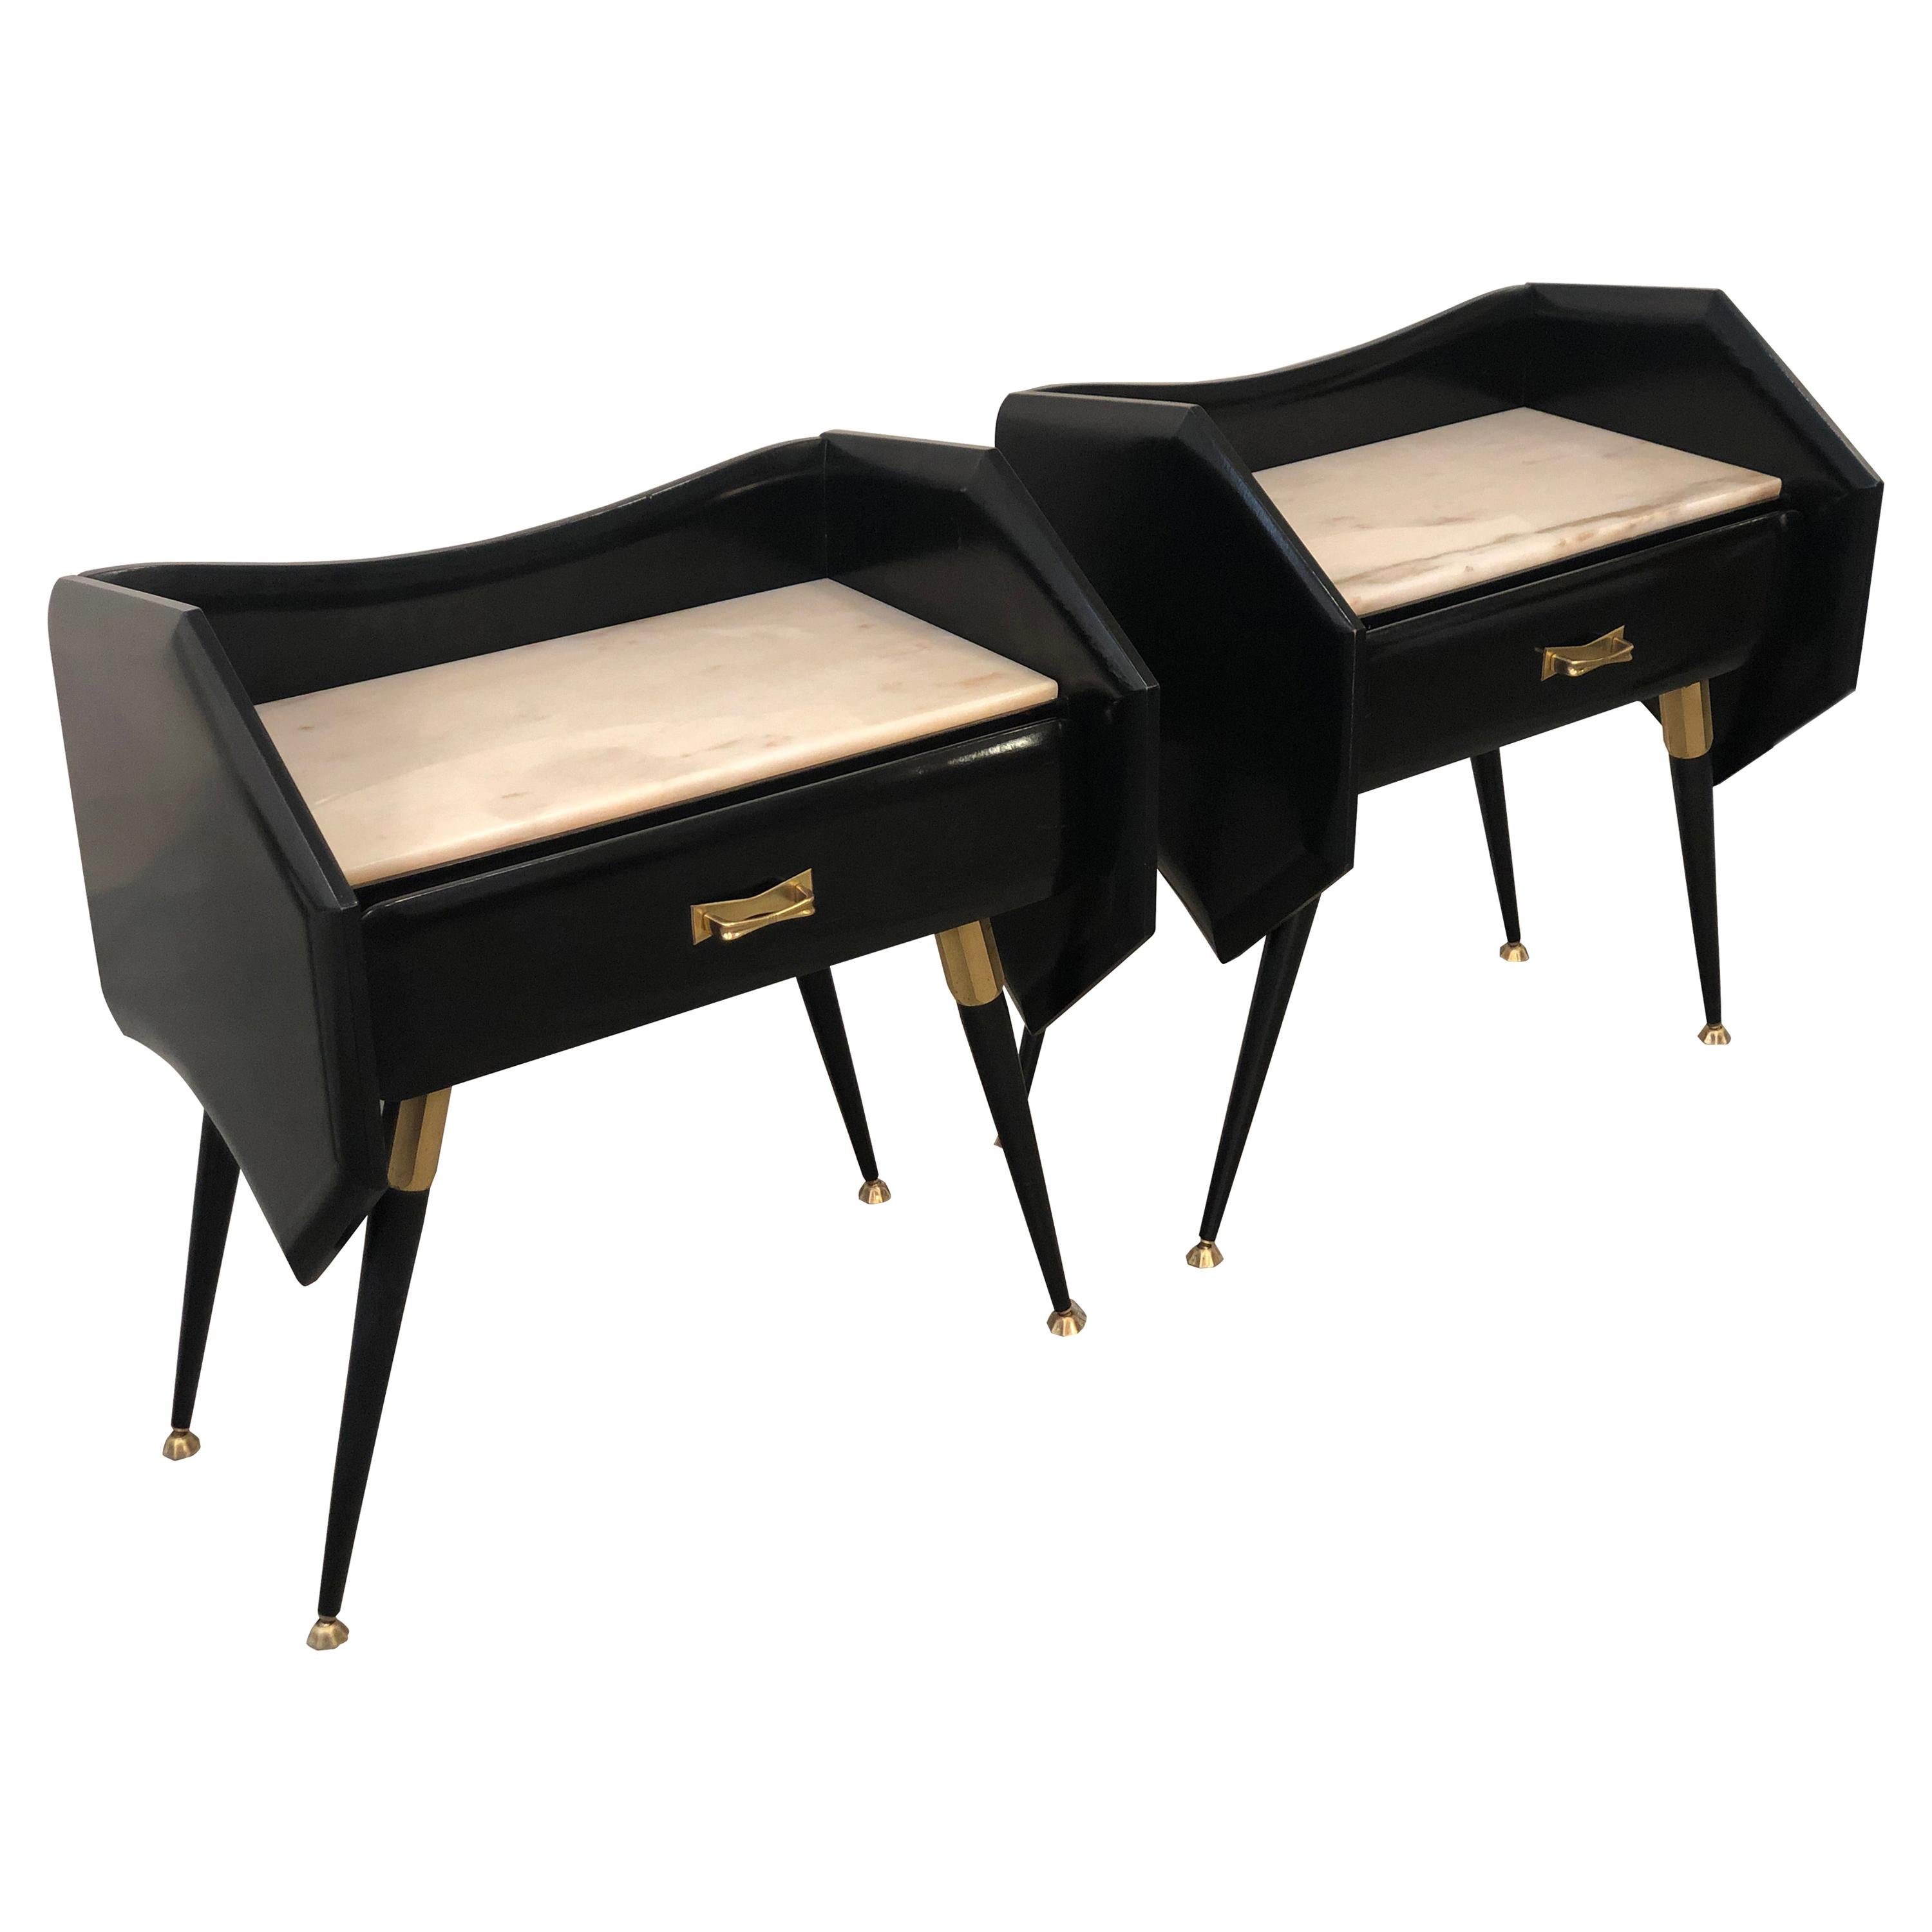 Italian Mid Century Black Bedside Tables with Marble Top and Brass Details